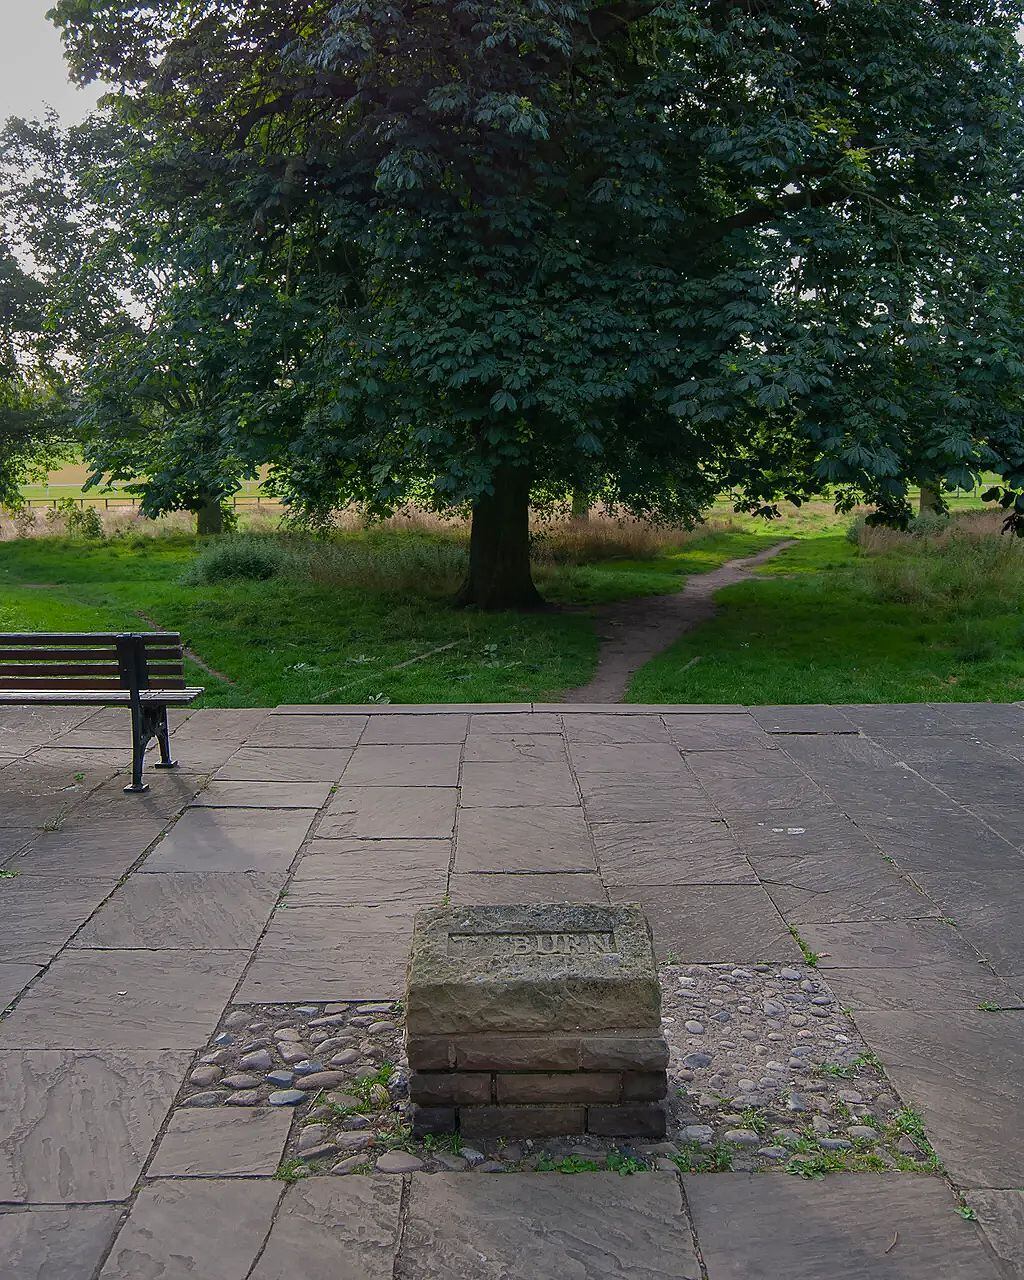 Now marked by a plaque, Knavesmire Tyburn was once the site of public hangings in York.  (GETTY IMAGES)